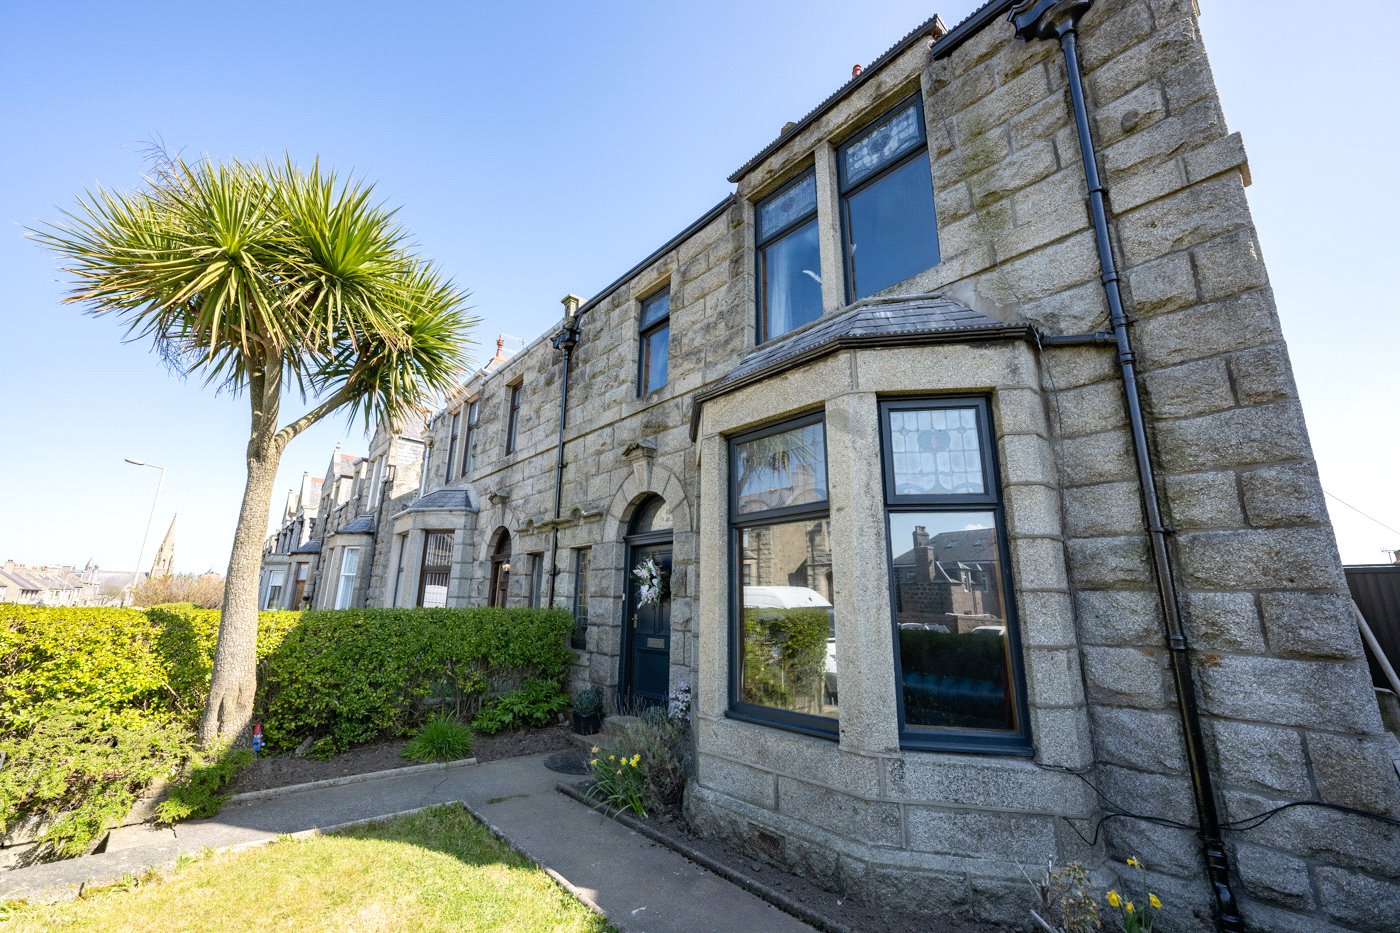 Our latest properties for sale or to let (4th June 2022)